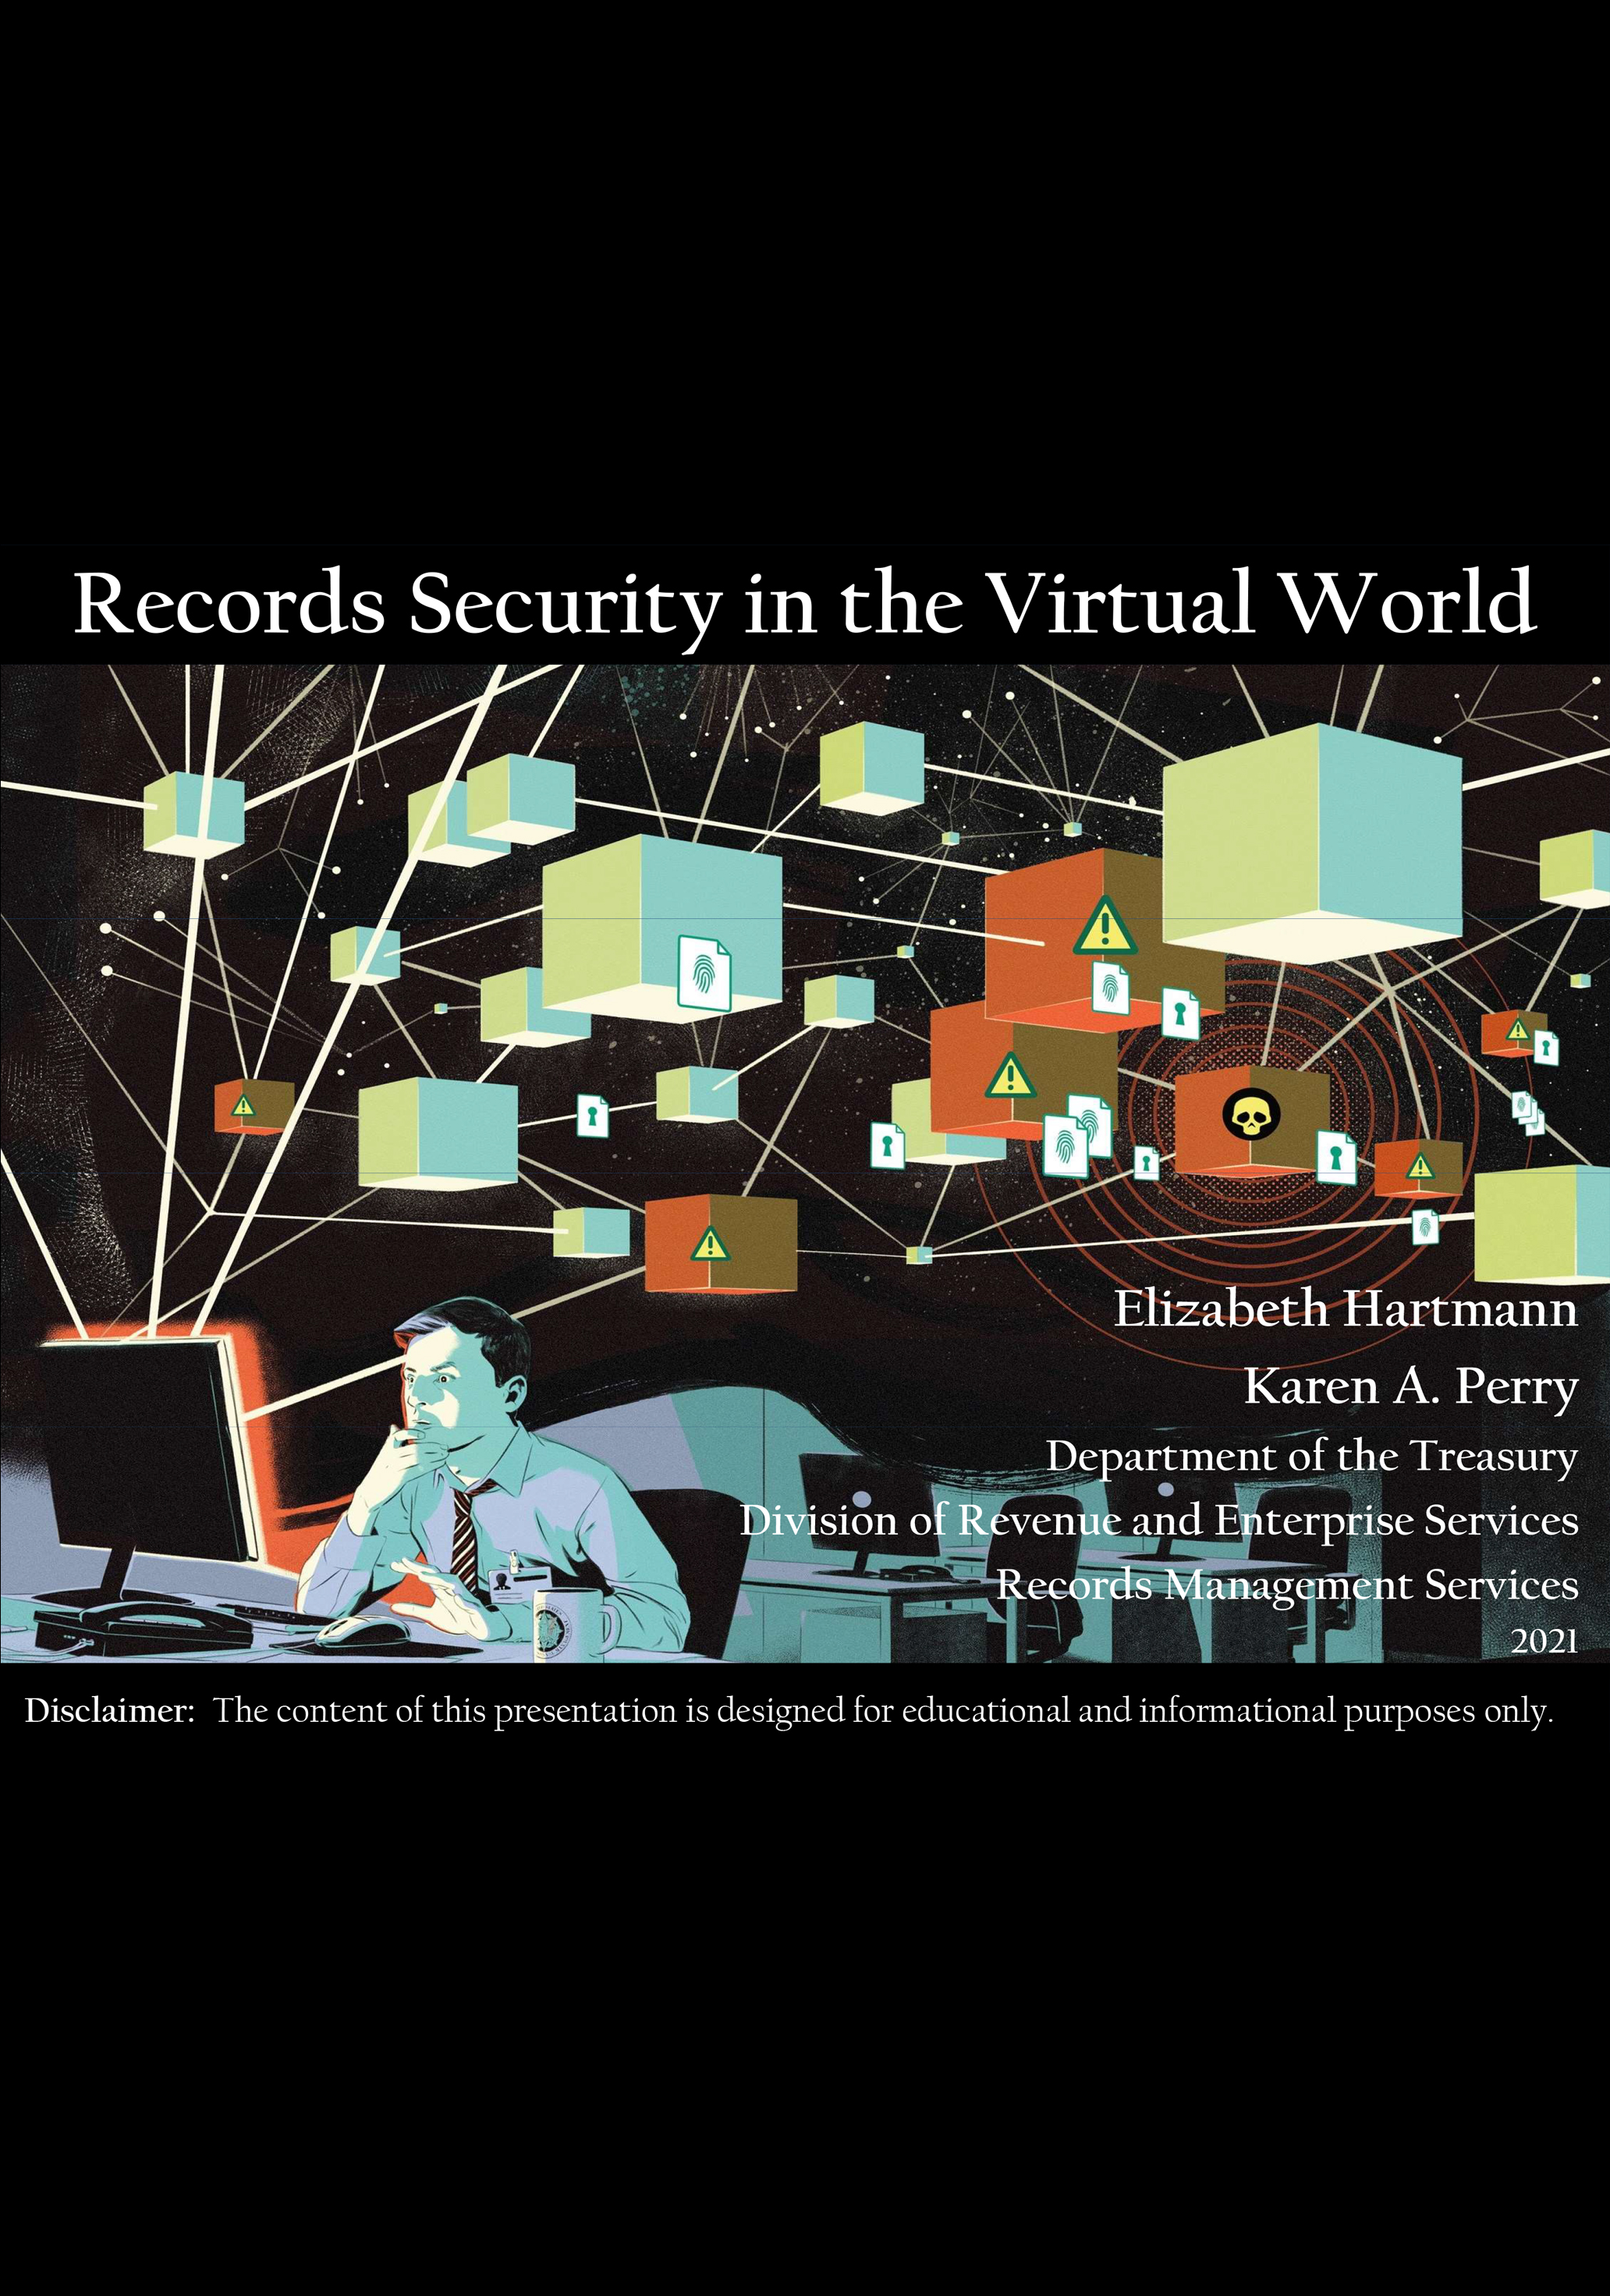 Records Security in the Virtual World